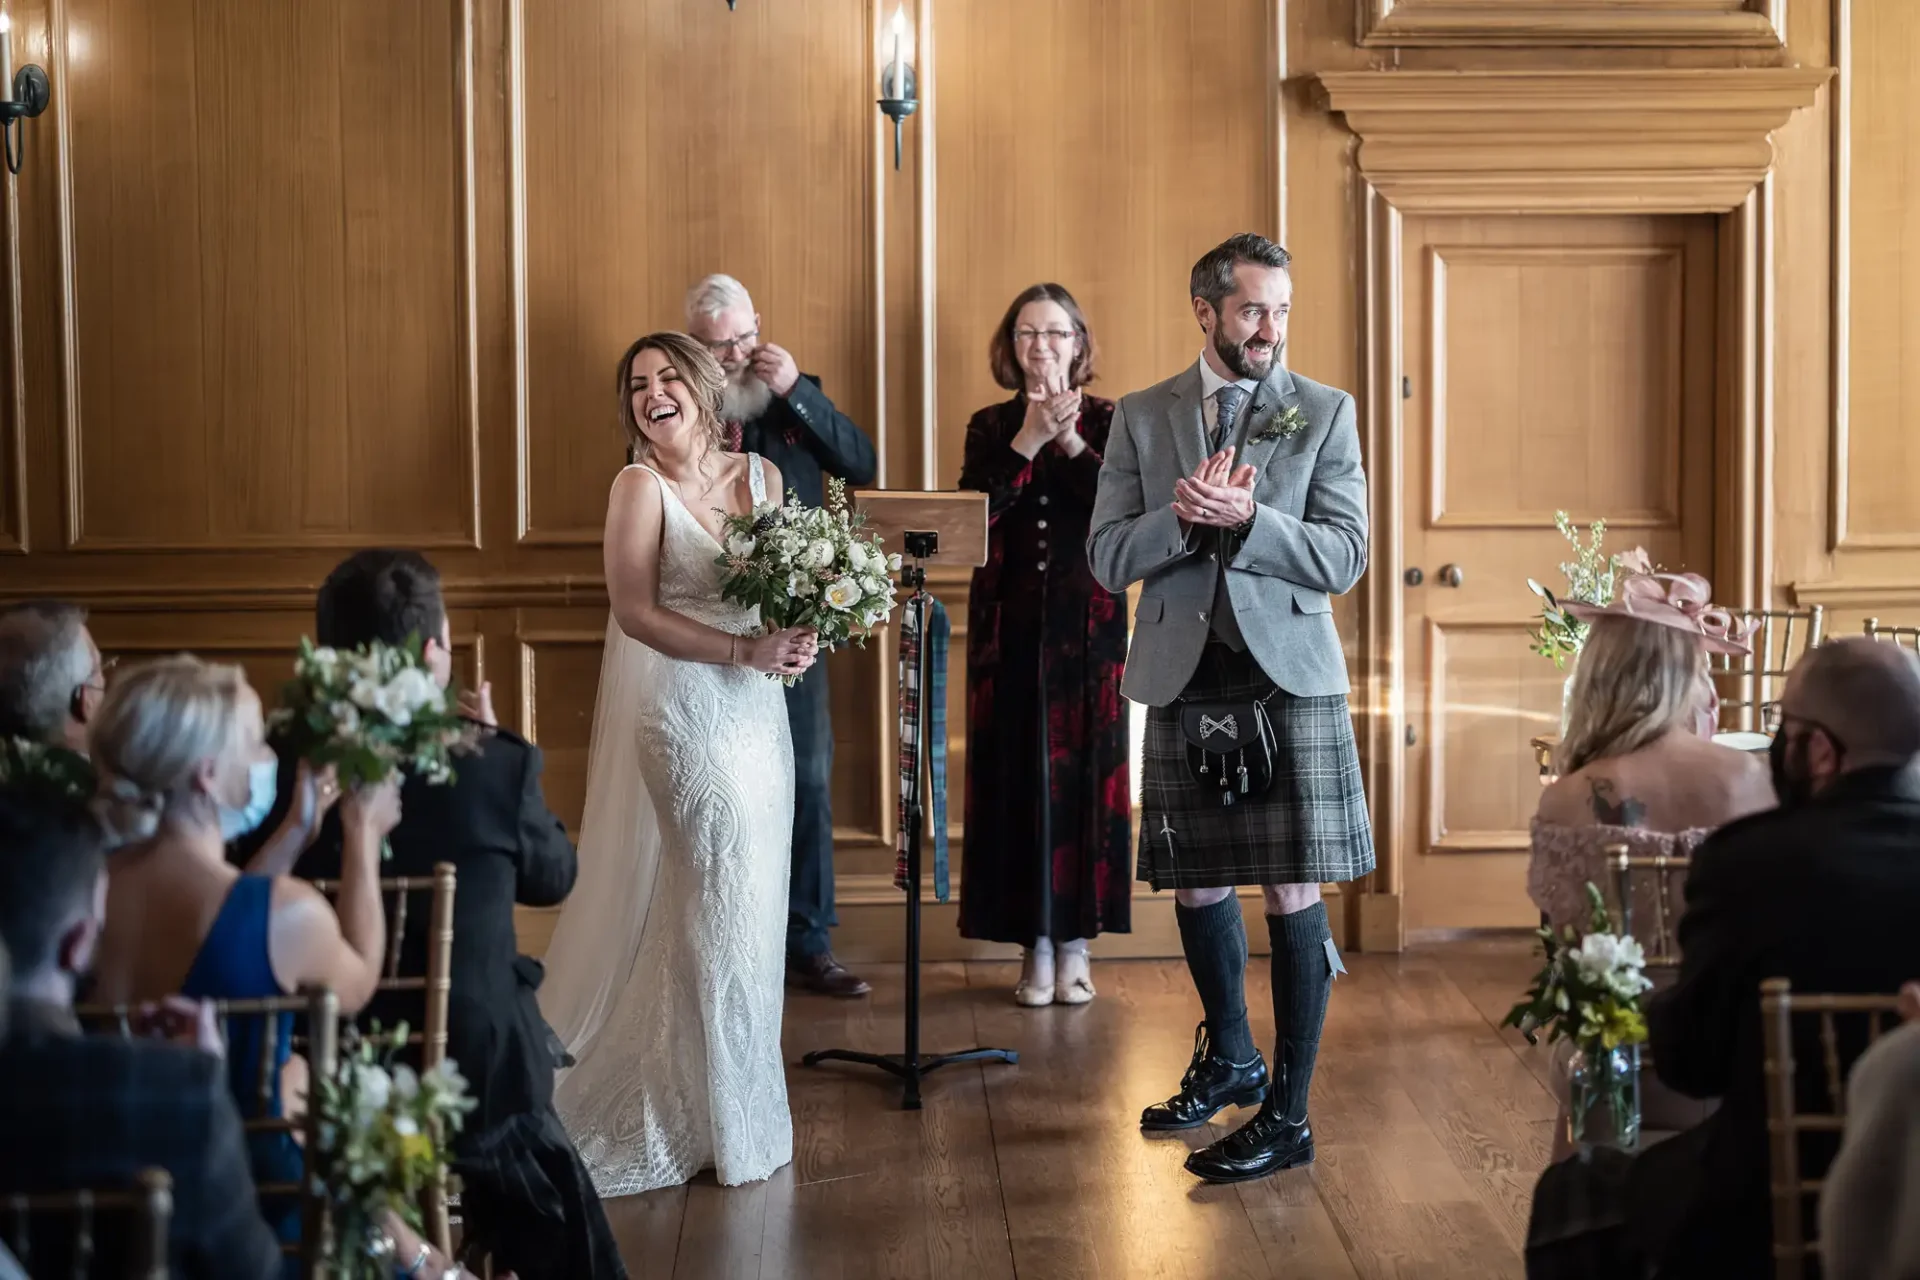 A joyful wedding scene in a grand hall: a bride and groom, the latter in a kilt, smiling brightly as they walk down the aisle, with guests applauding around them.